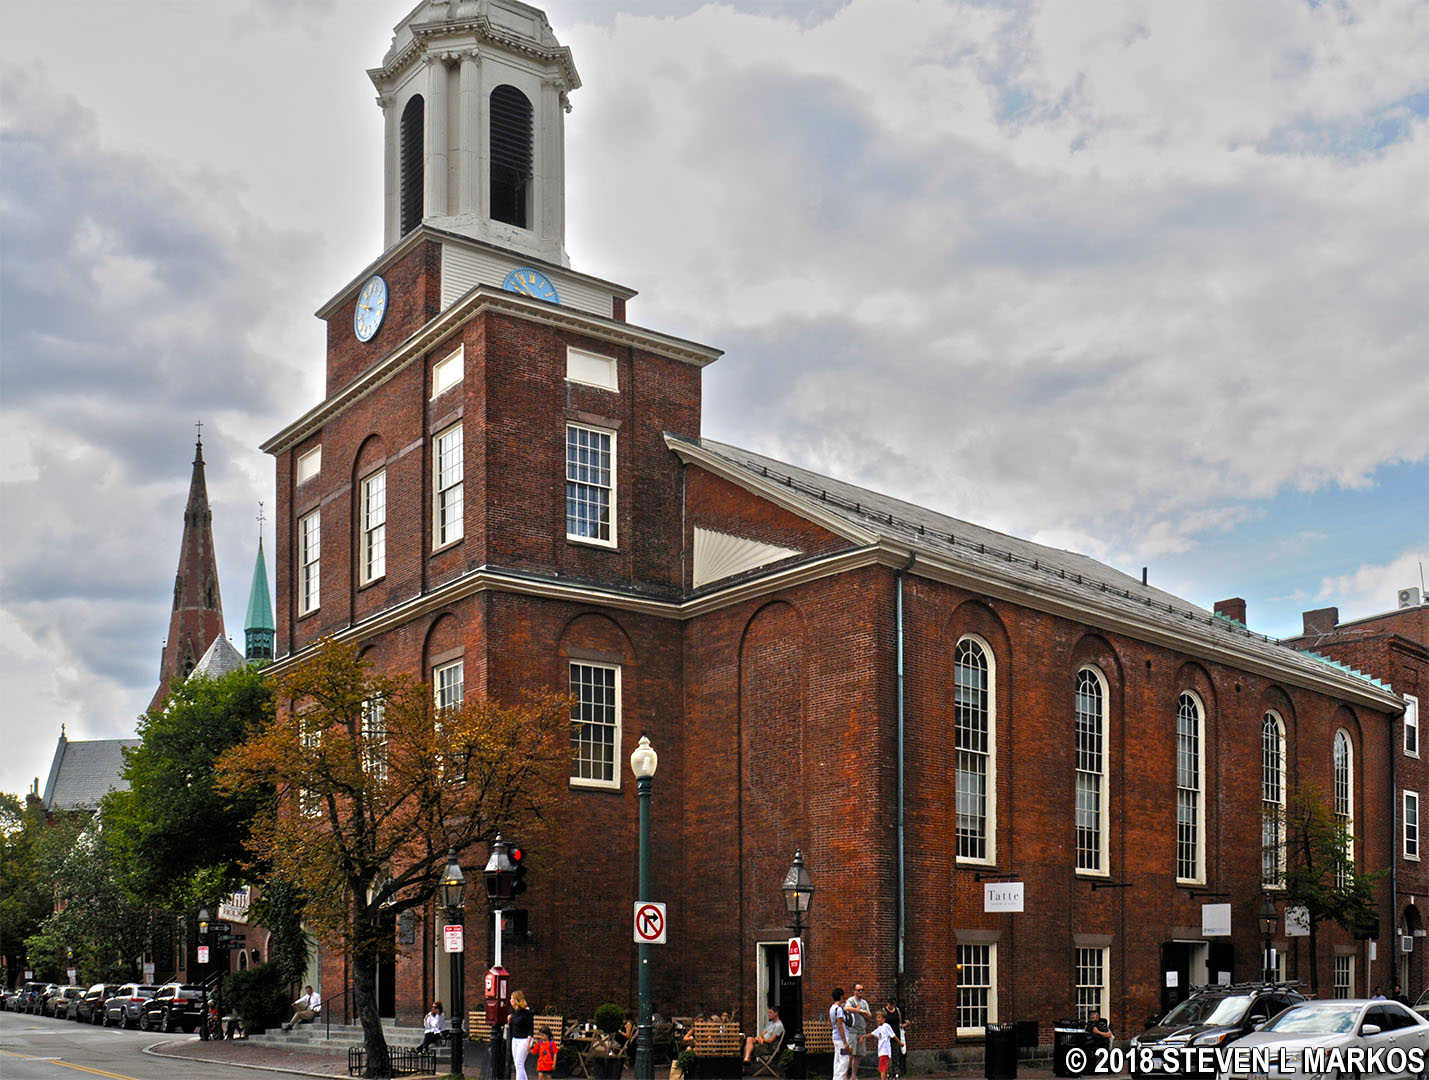 Beacon Hill?s Charles Street Meeting House?History with